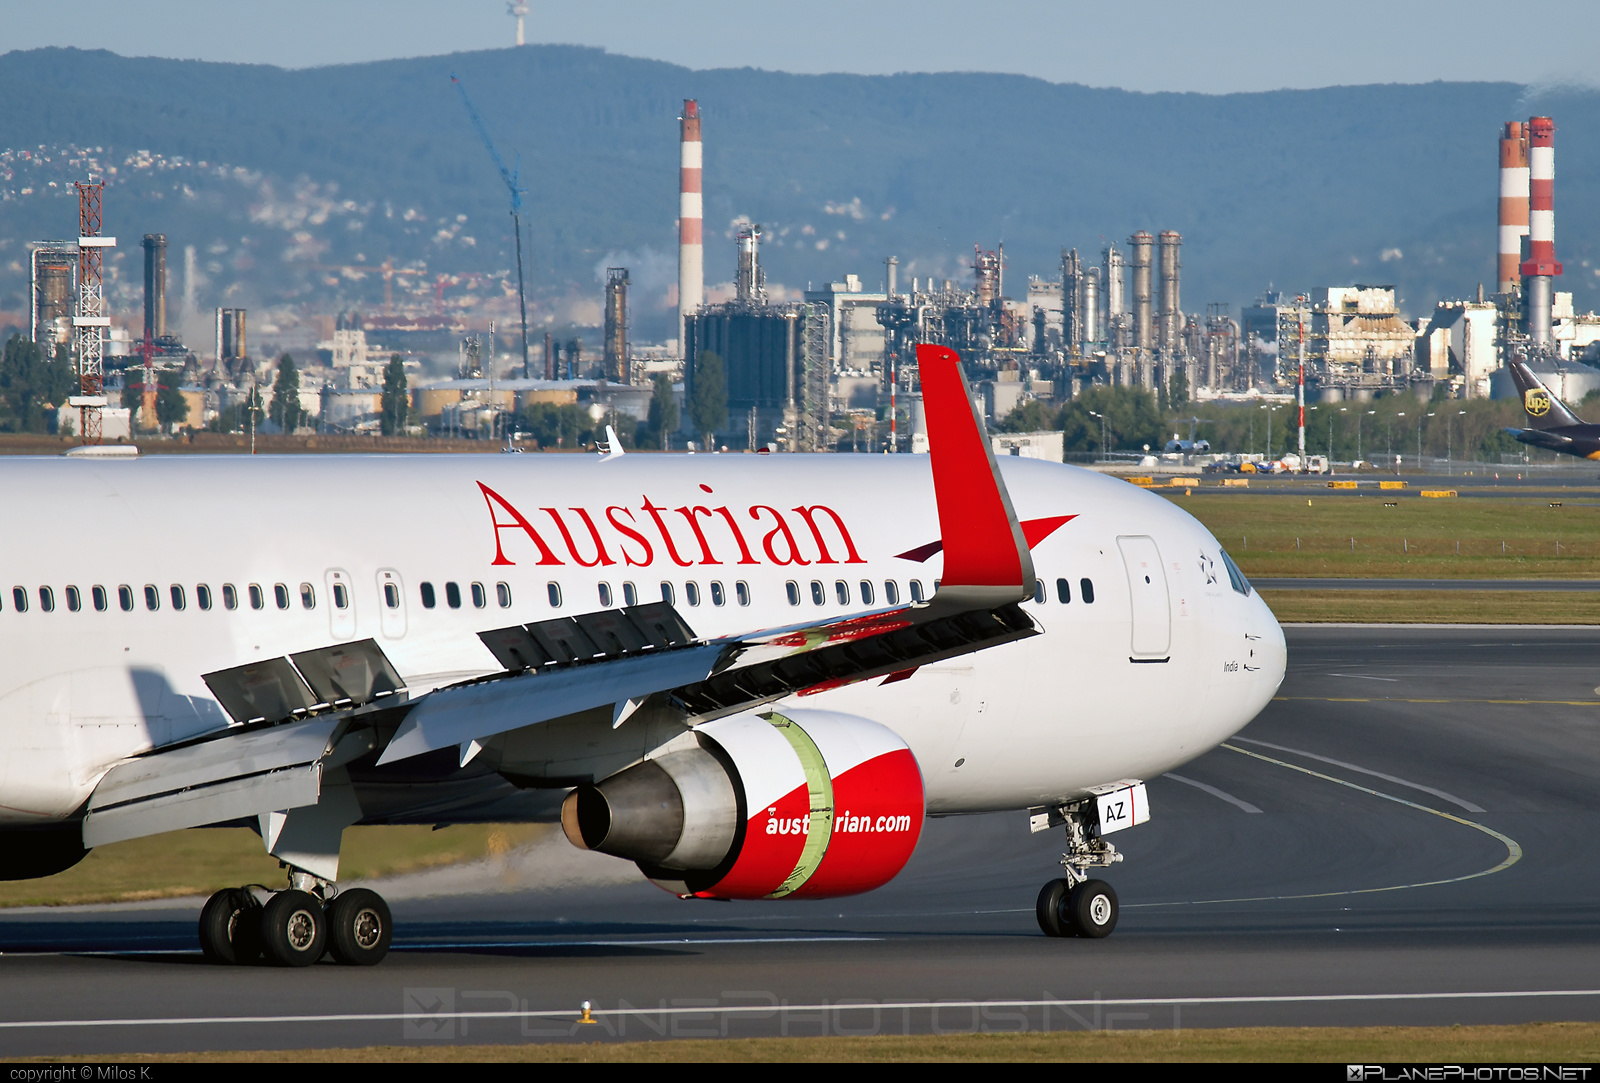 Boeing 767-300ER - OE-LAZ operated by Austrian Airlines #austrian #austrianAirlines #b767 #b767er #boeing #boeing767